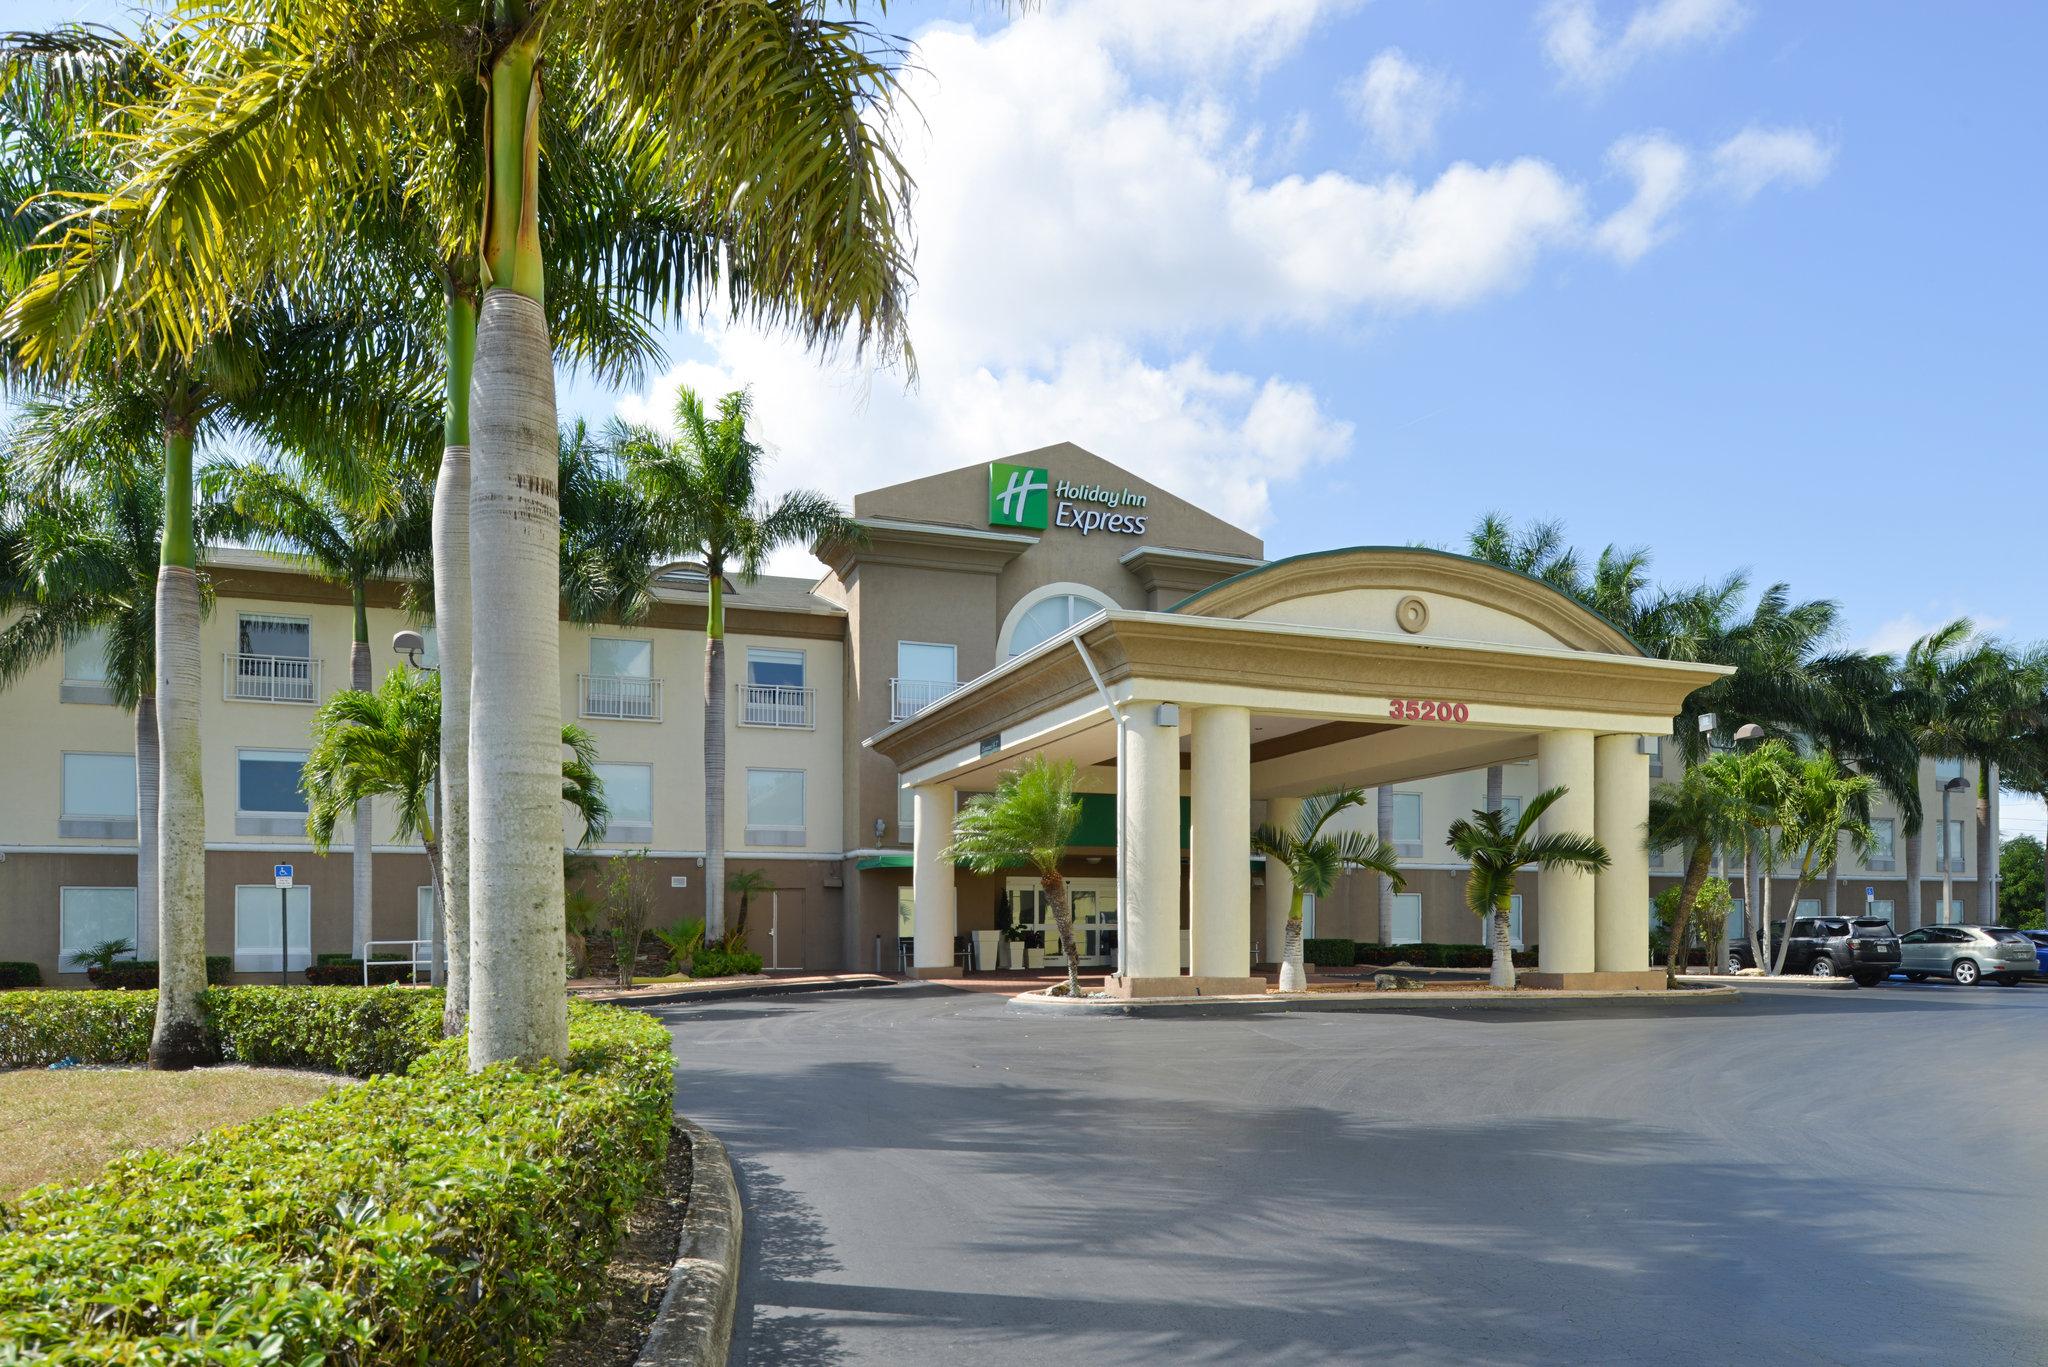 Holiday Inn Express Hotel & Suites Florida City-Gateway To Keys in Florida City, FL